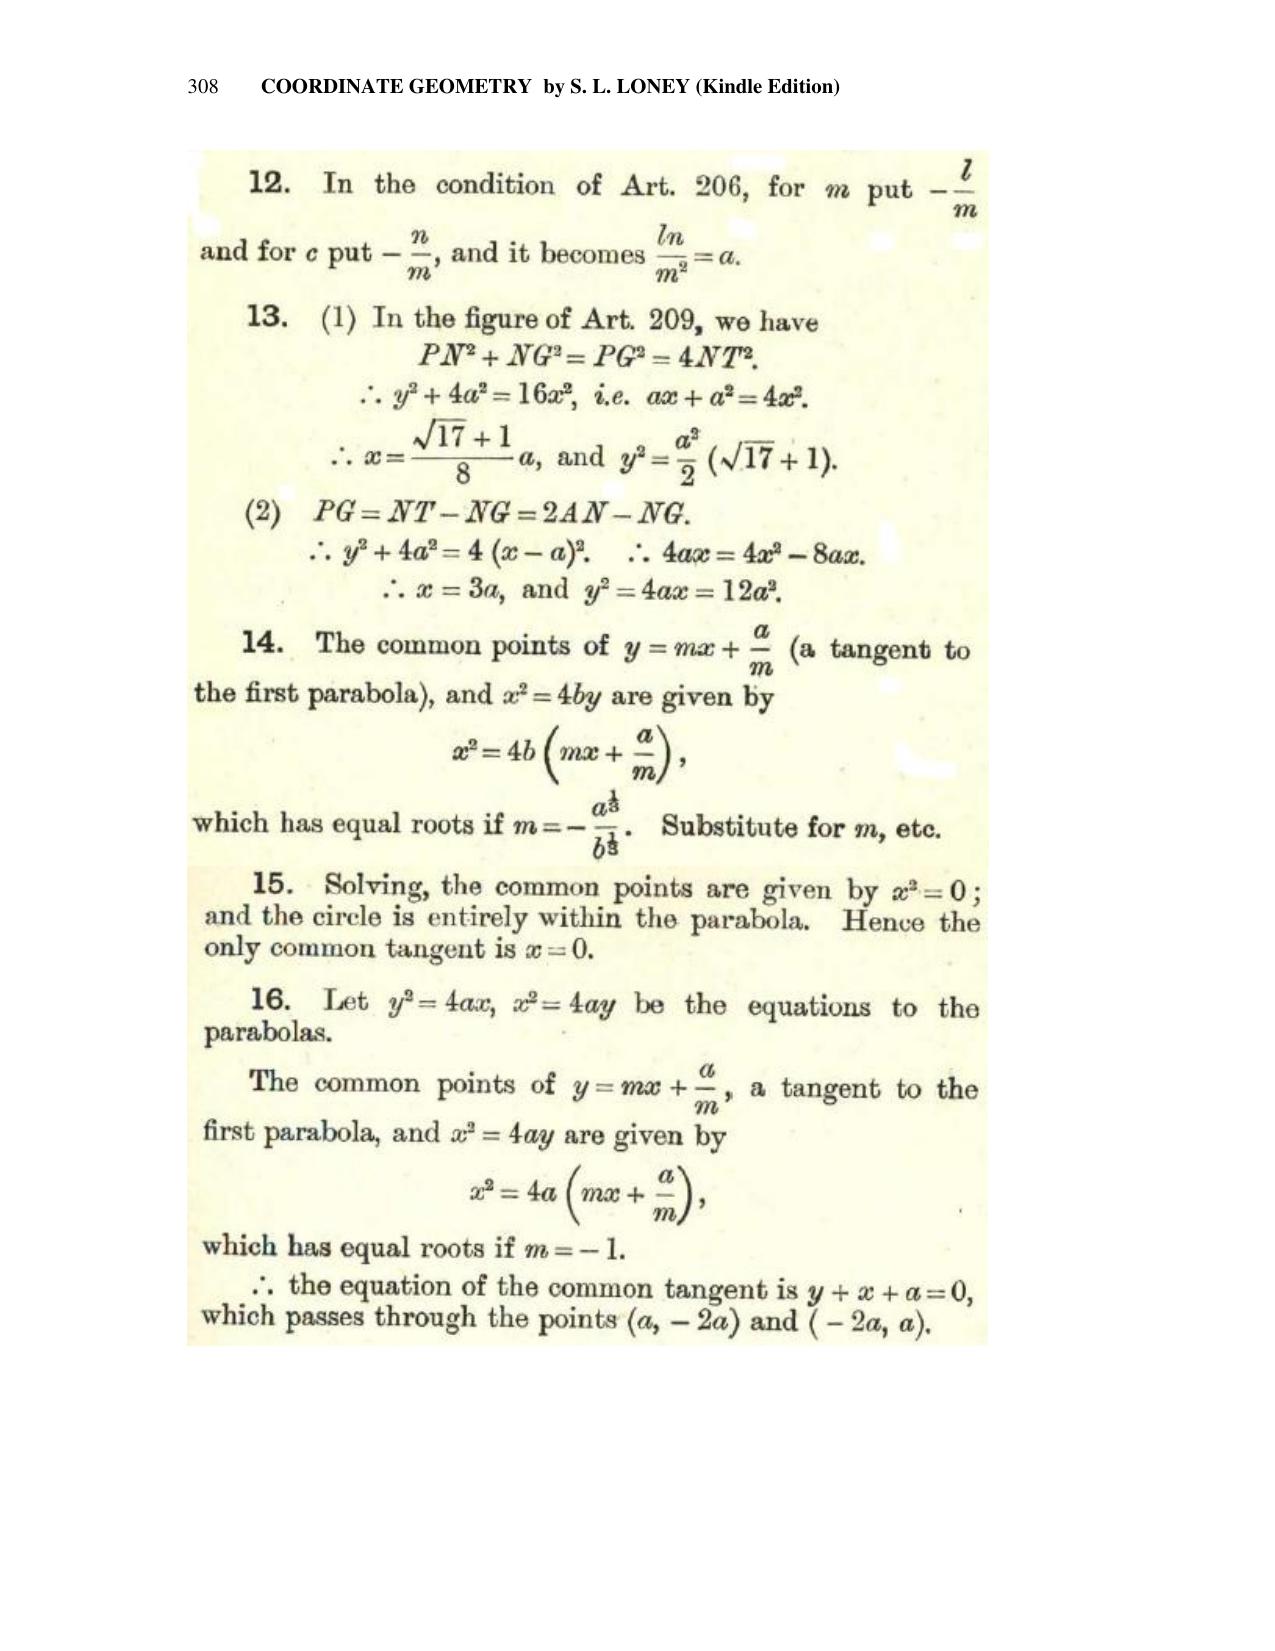 Chapter 10: The Parabola - SL Loney Solutions: The Elements of Coordinate Geometry - Page 22